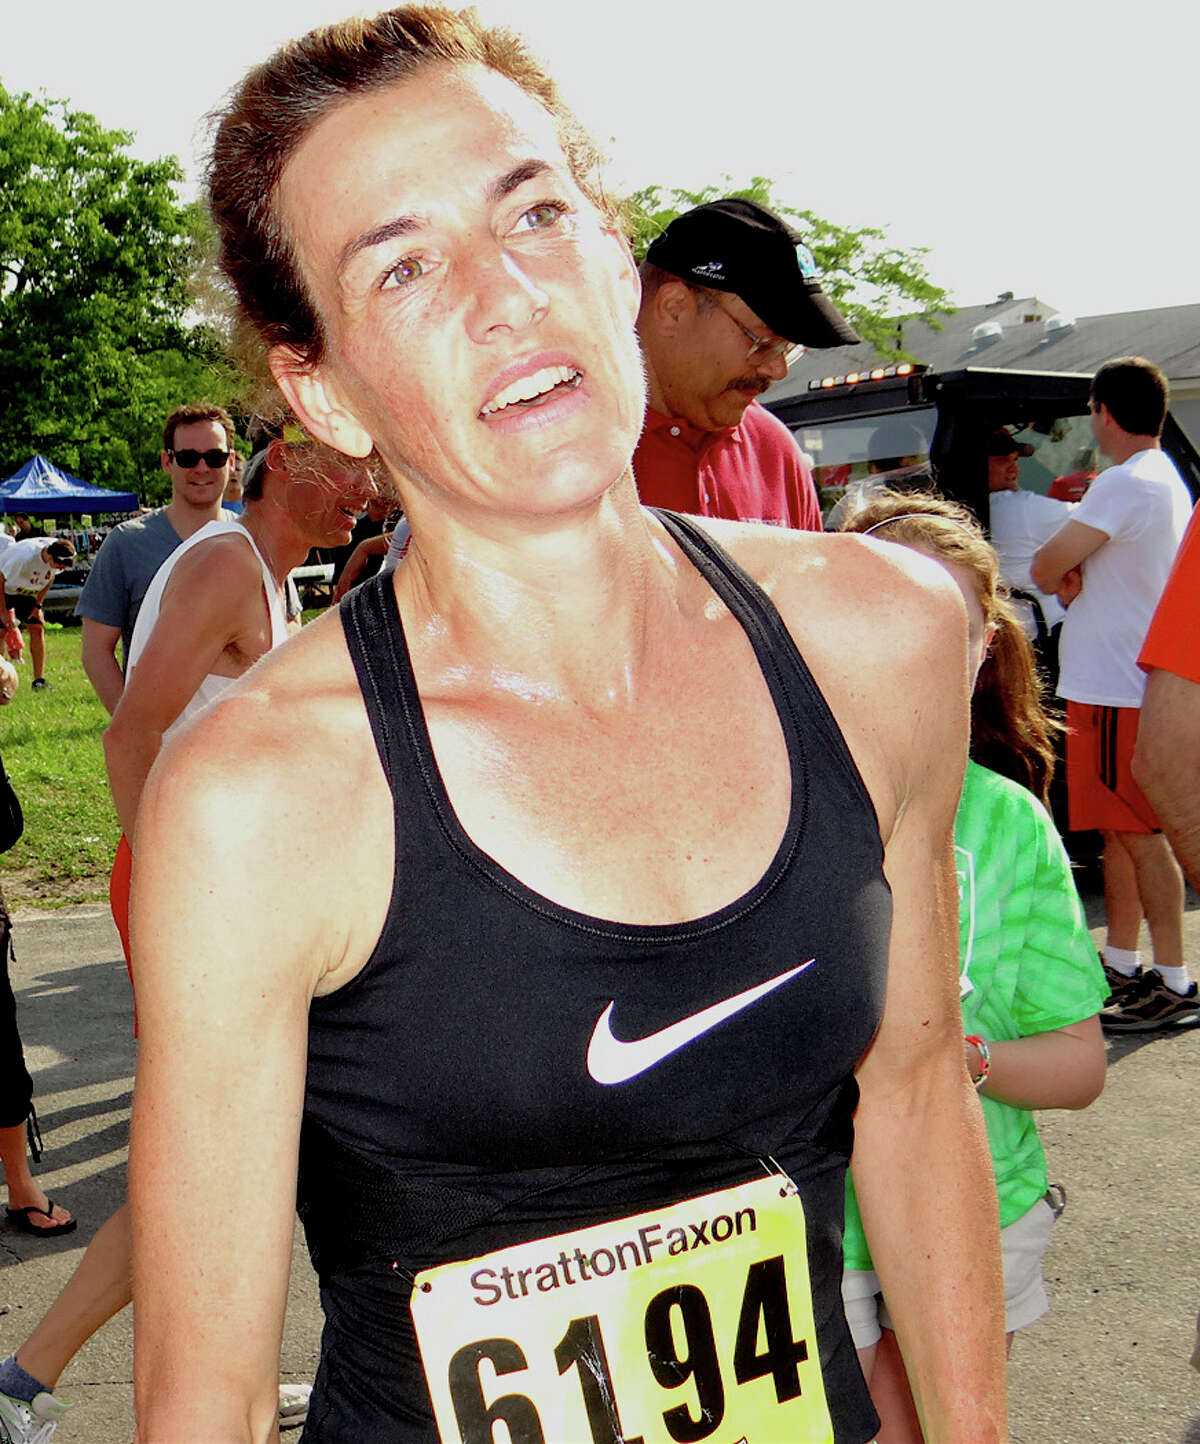 Mary Zengo finished first among women, with a time of 18:36, in the Fairfield Road Races 5K on Saturday.